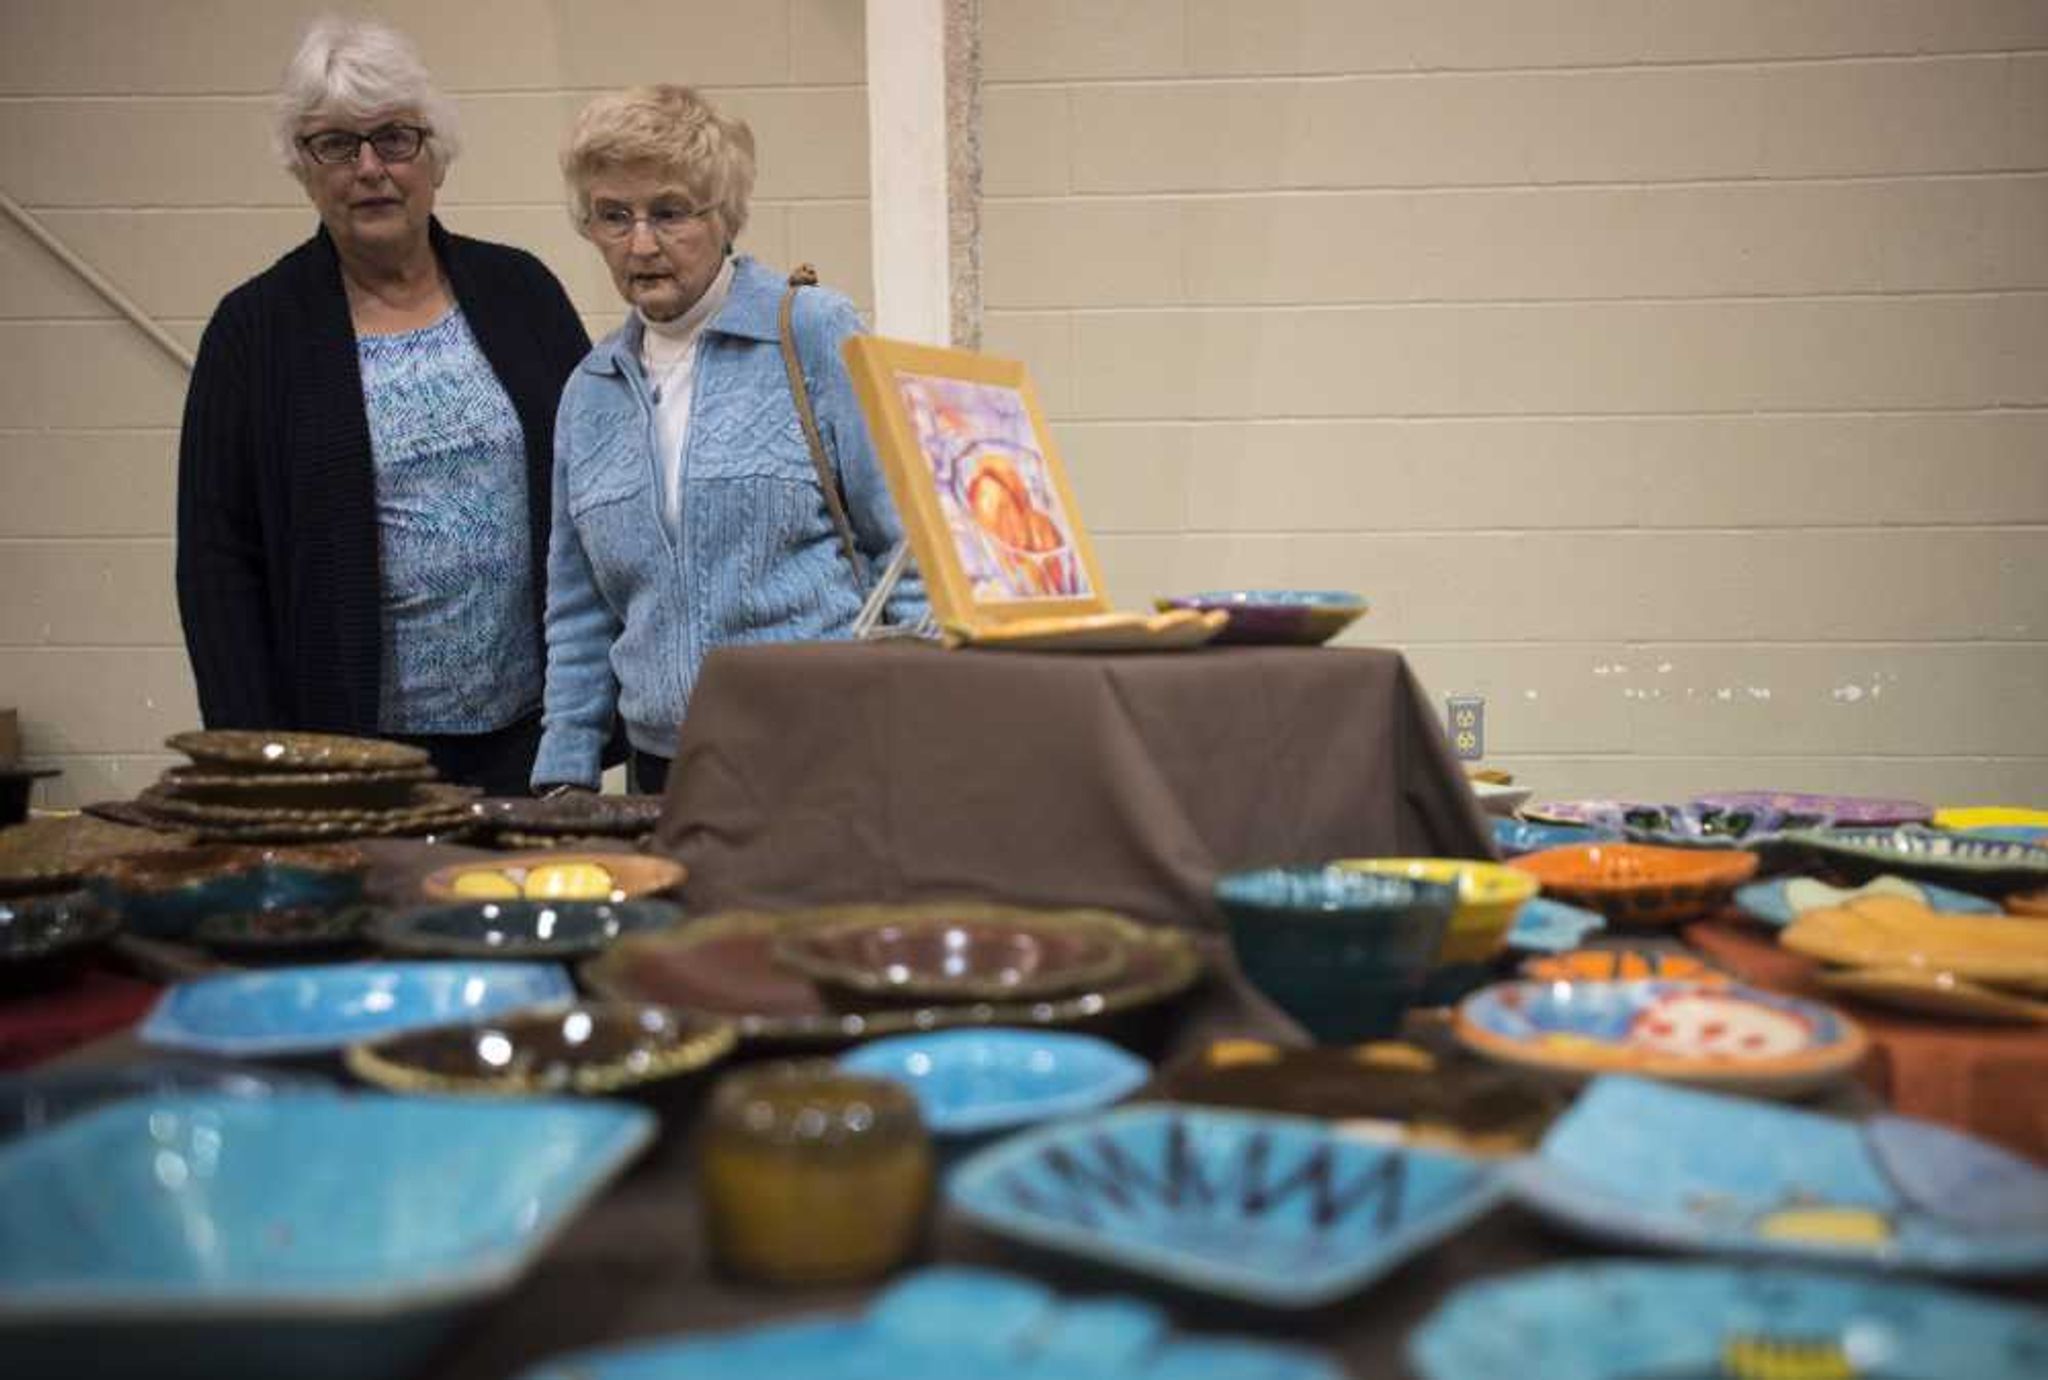 Nancy Glosemeyer, left, and Marilyn Harrison look at decorative bowls during the Empty Bowls Banquet on Sunday.